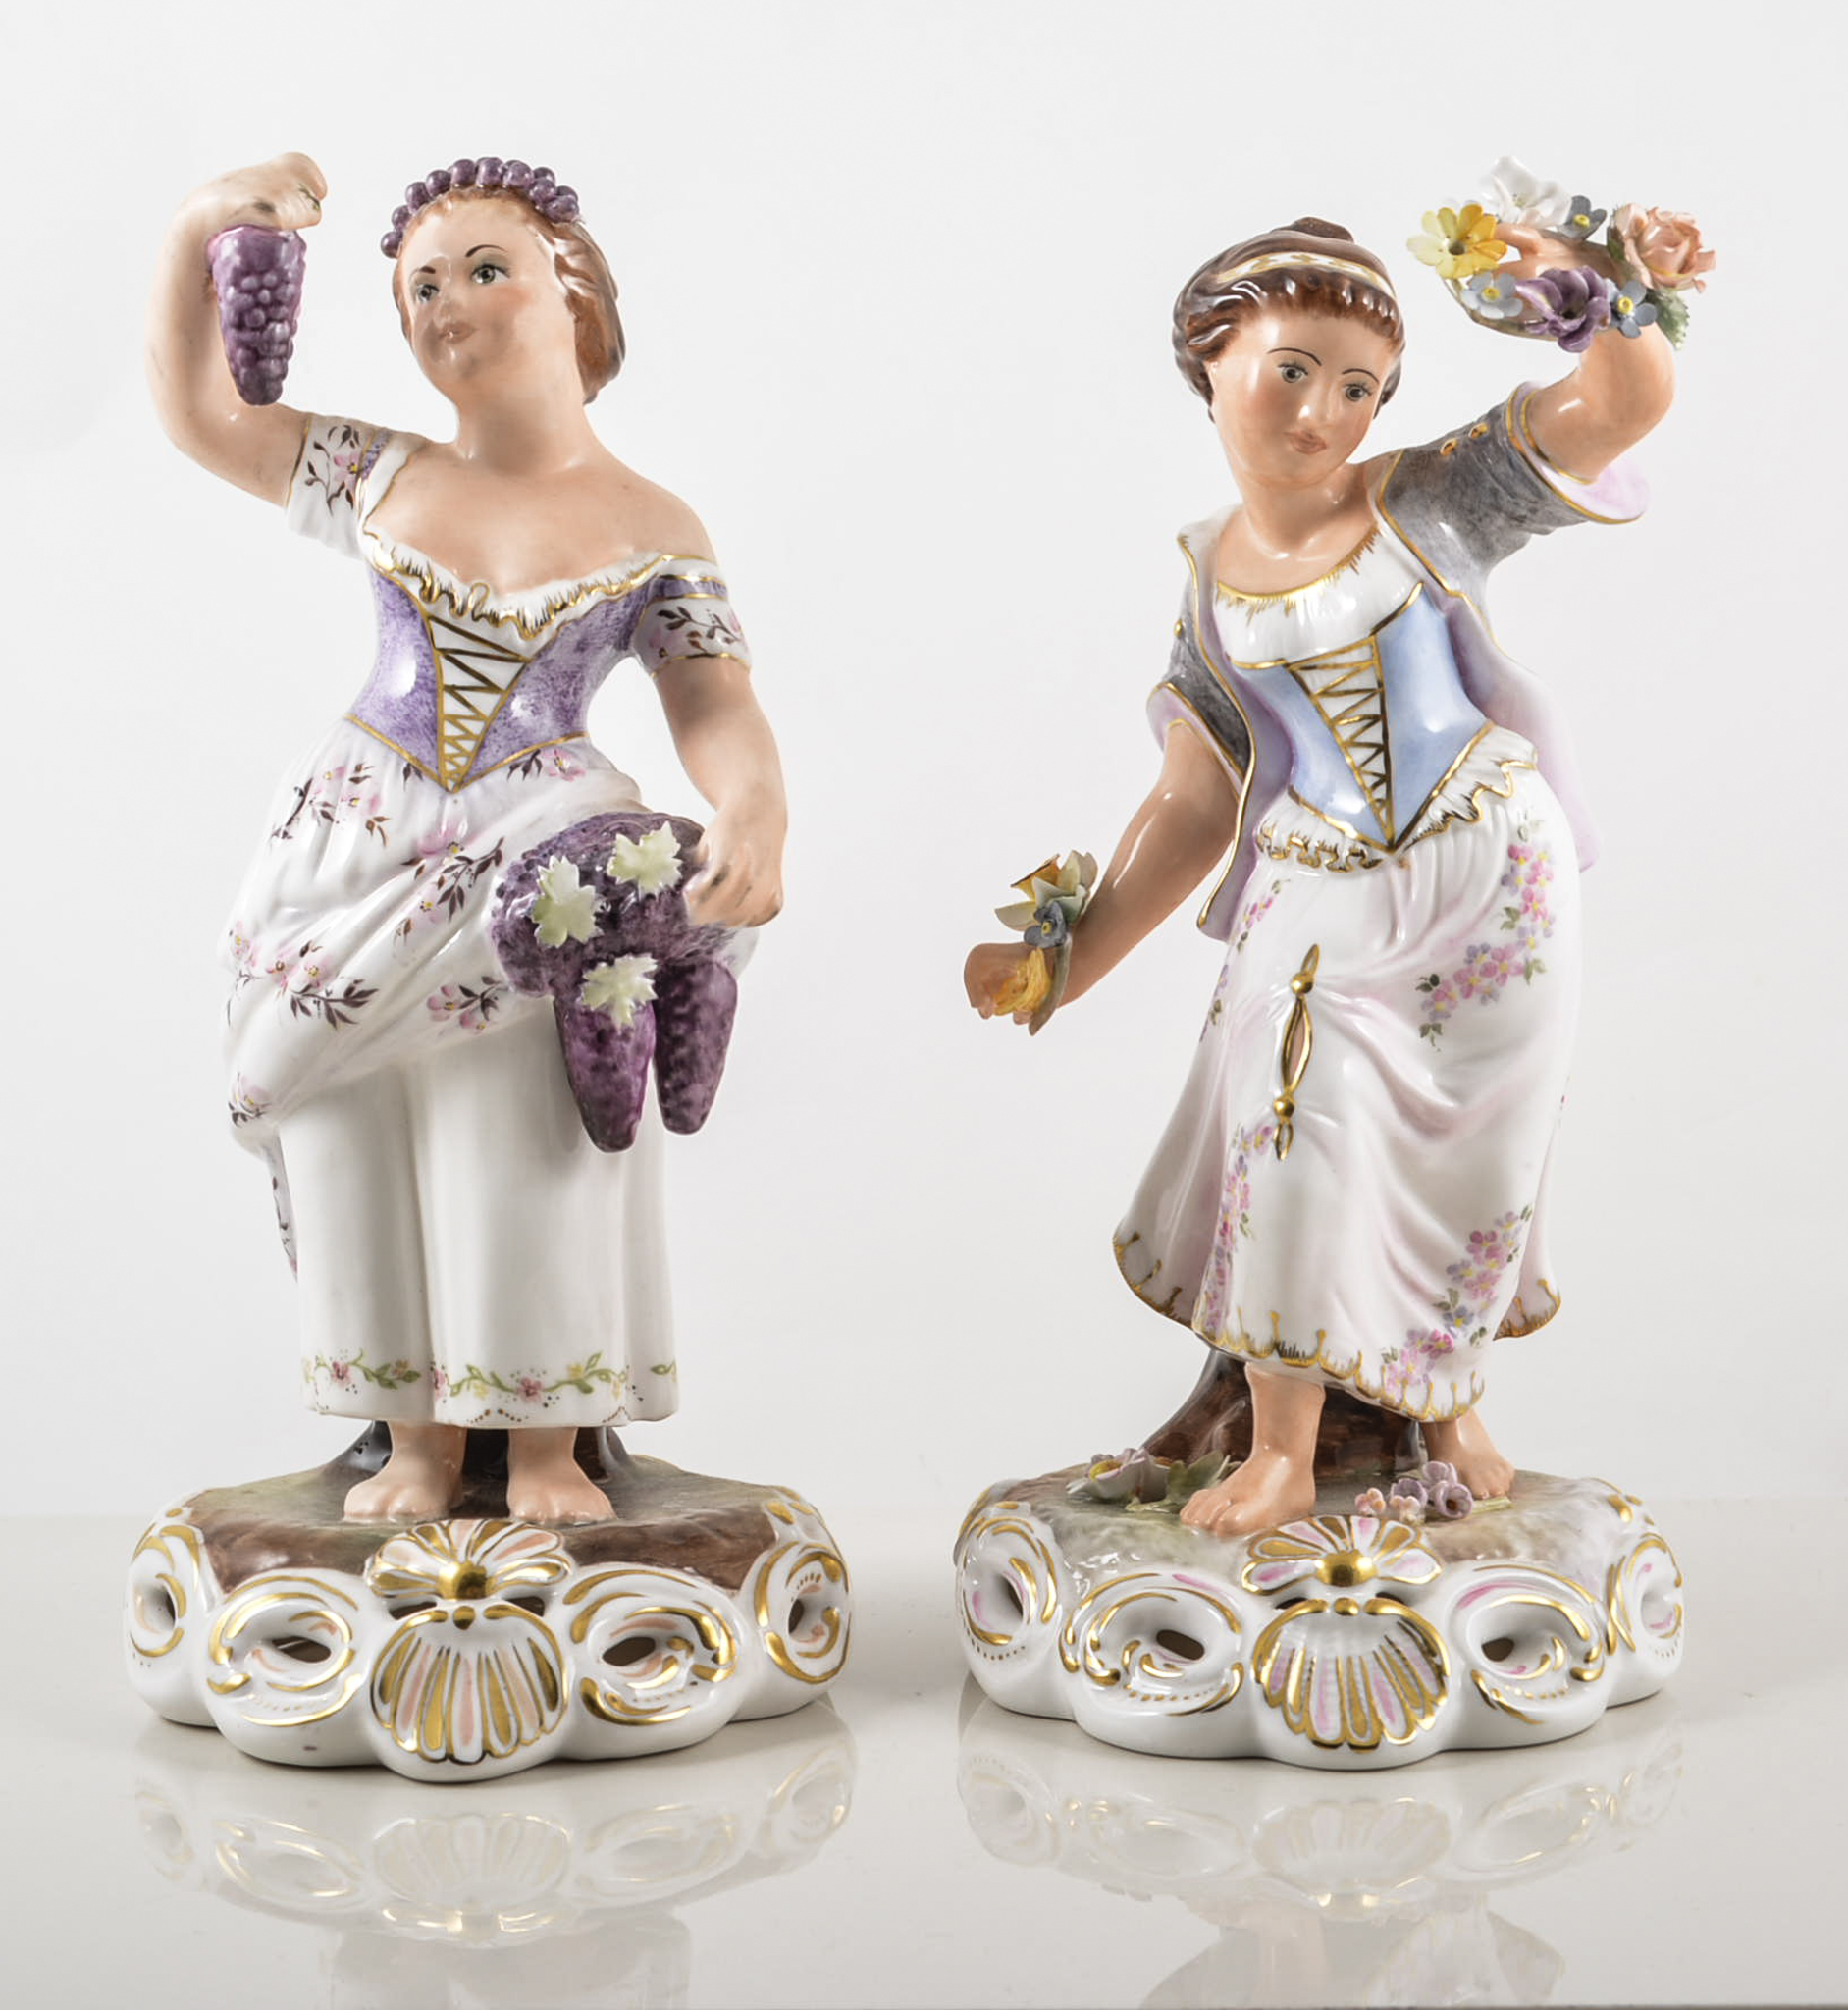 Pair of Royal Crown Derby figures, "Autumn" by J. Morrison, 'Spring" by S Whitbread, height 22.